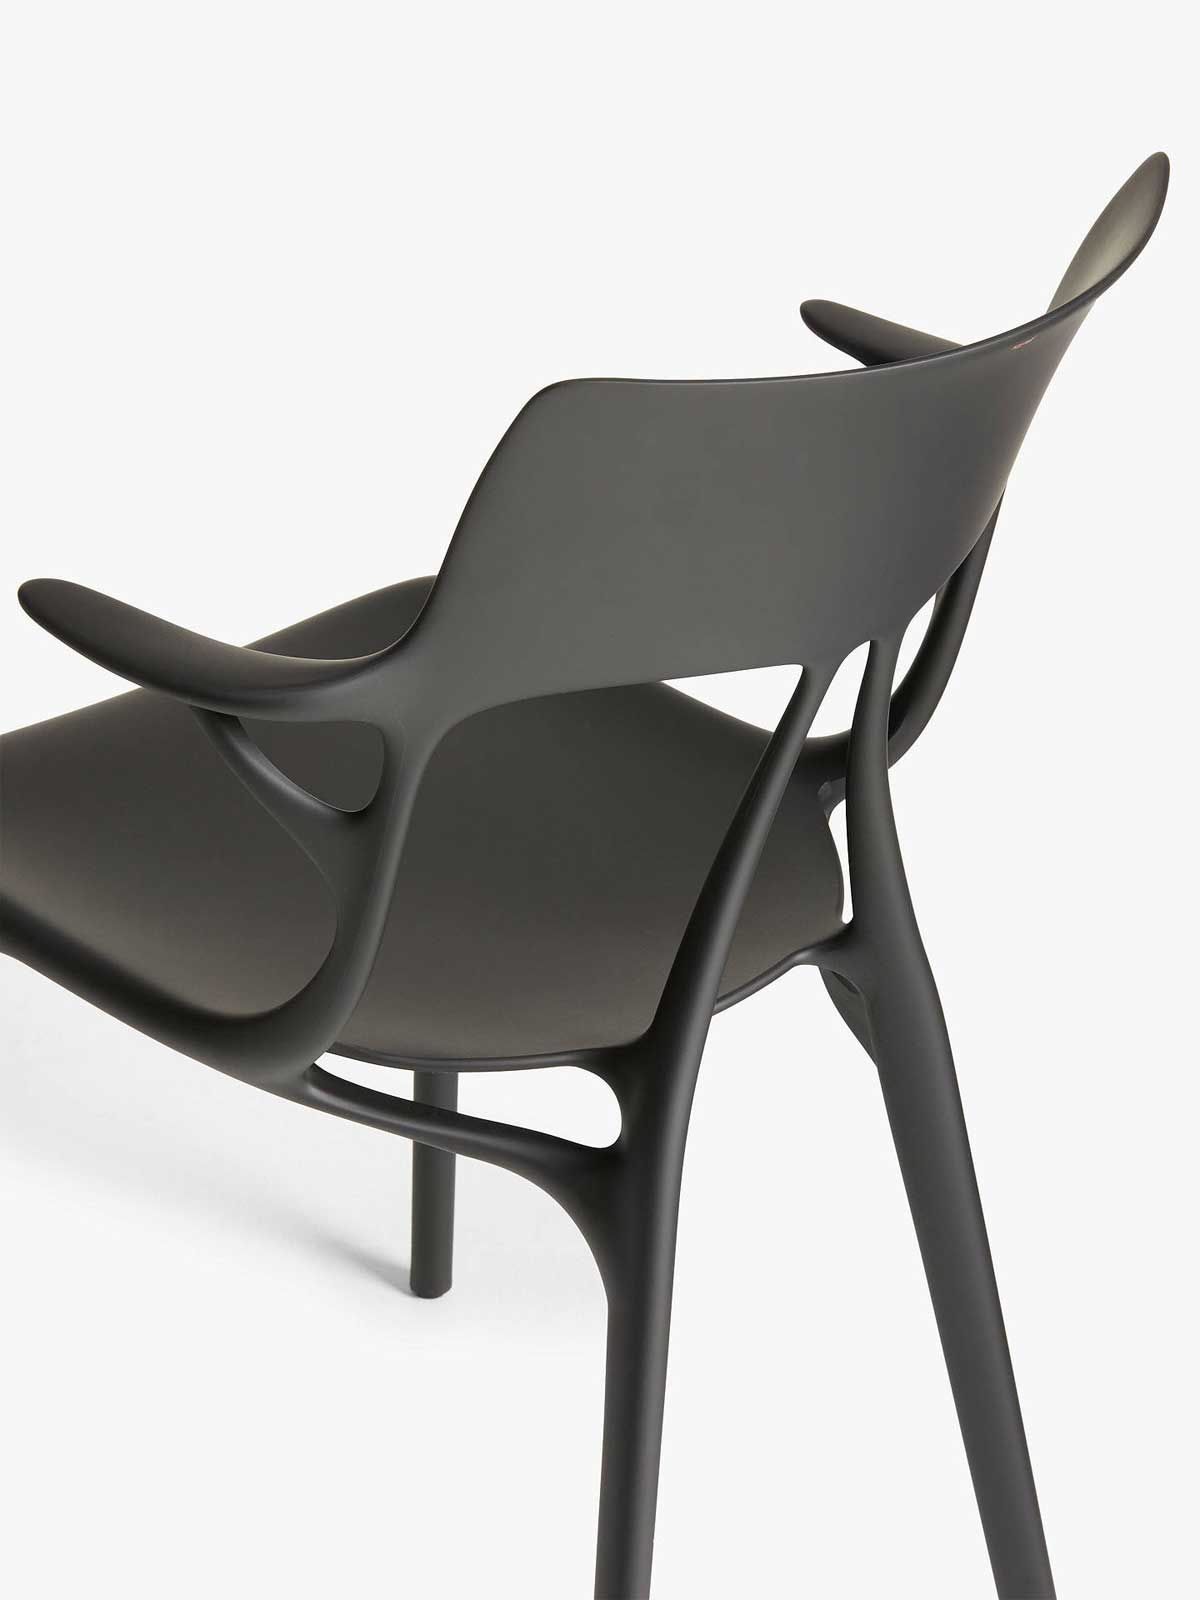 Philippe Starck for Kartell A.I. Recycled Plastic Chair